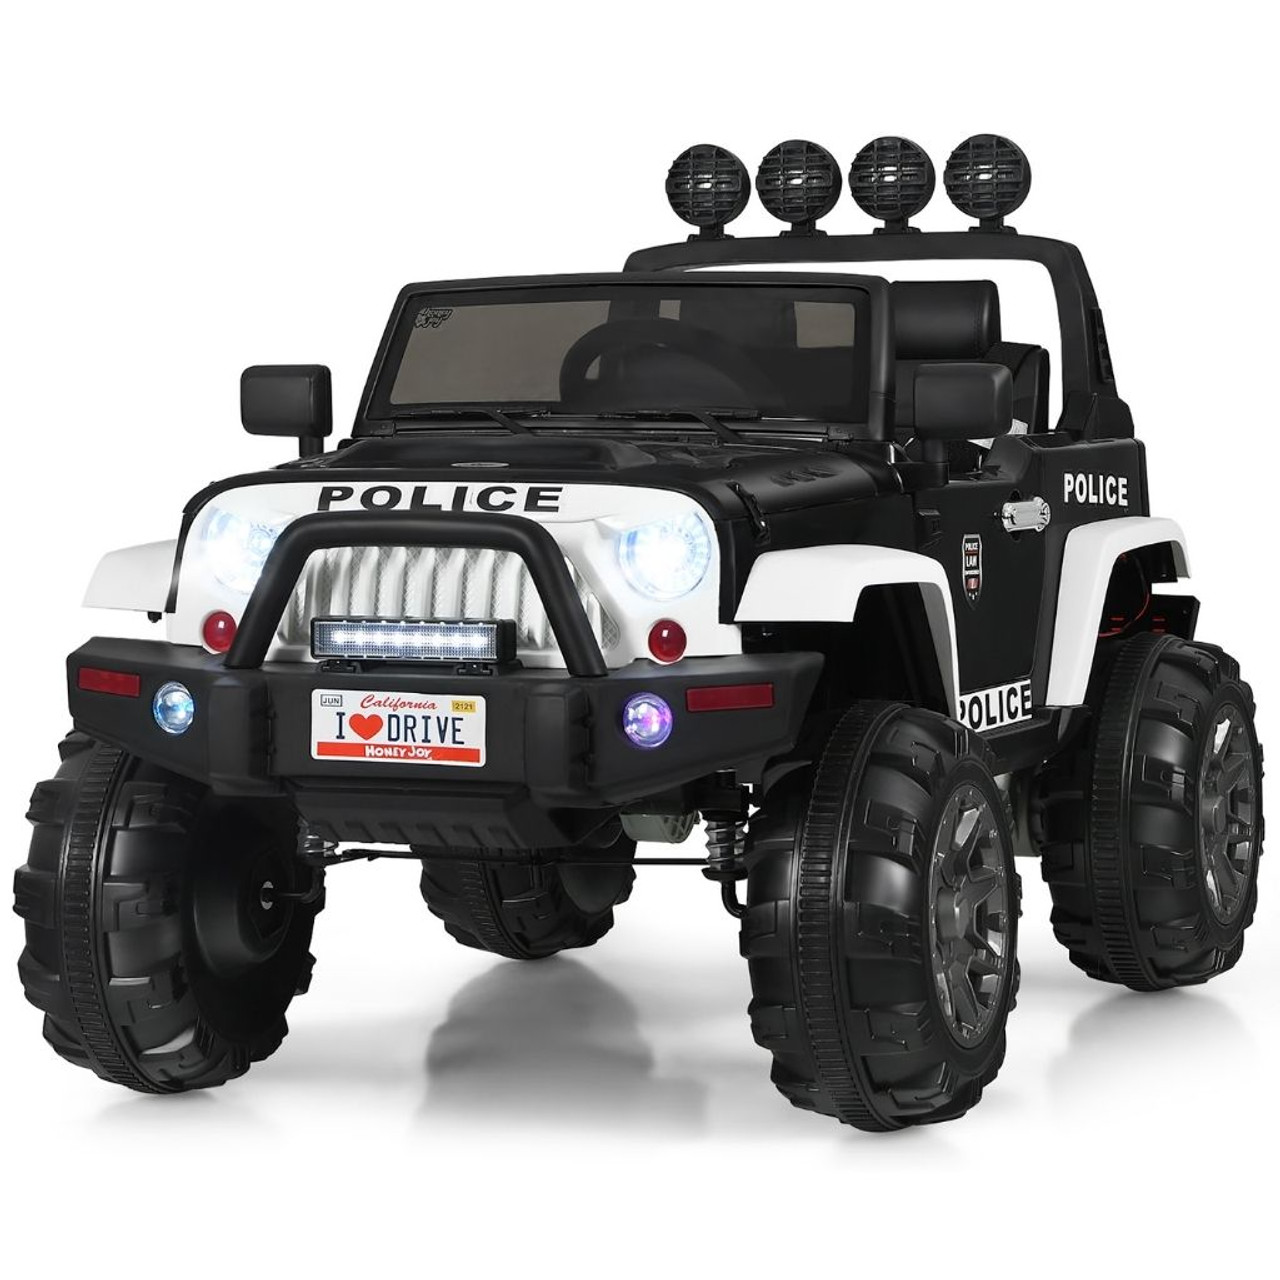 Kids' 12V Ride-on RC Police Vehicle product image